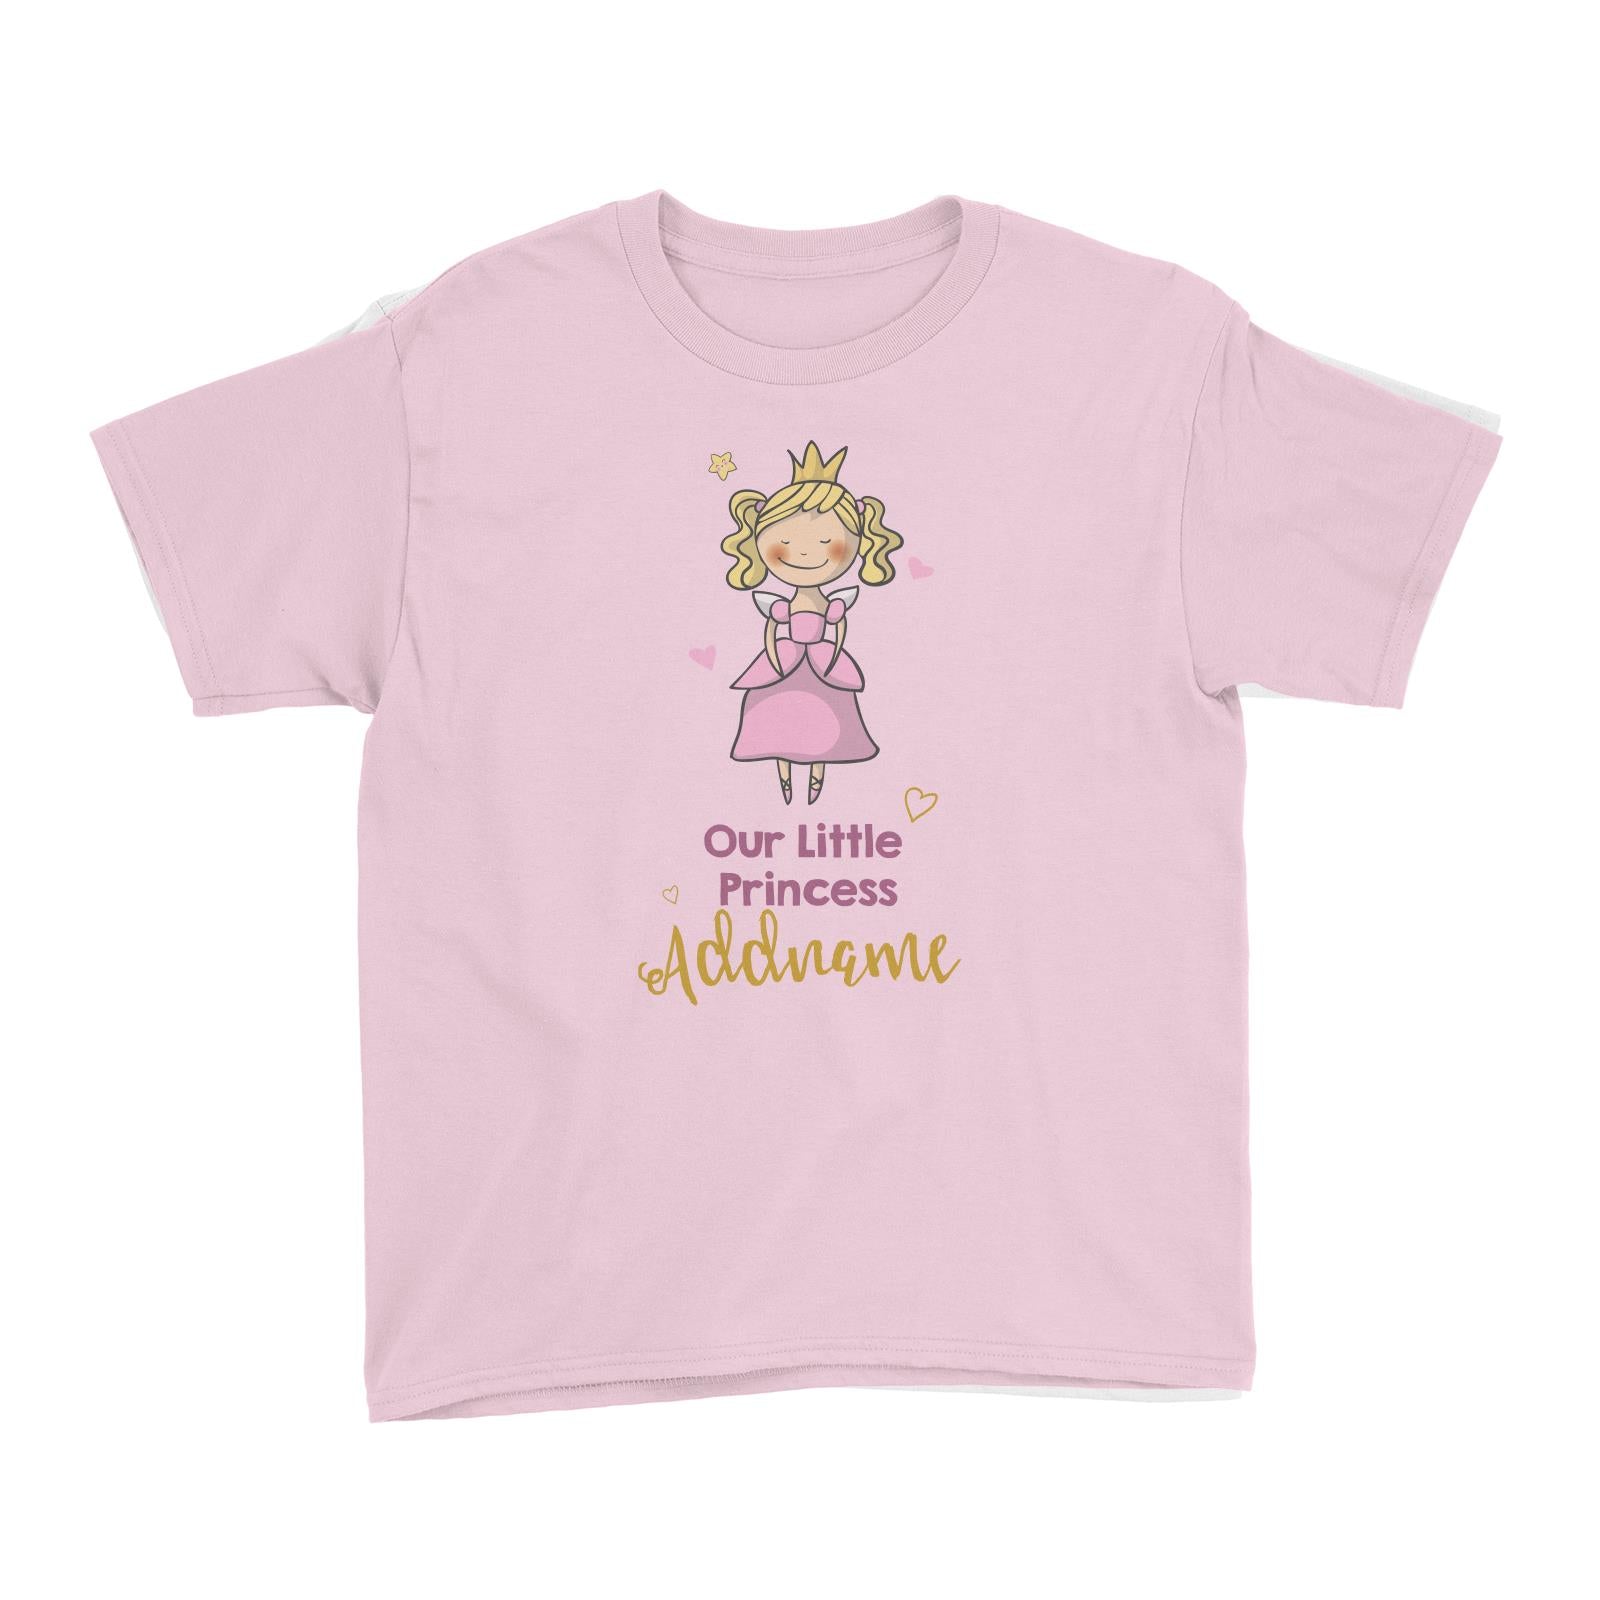 Our Little Princess in Pink Dress with Addname Kid's T-Shirt